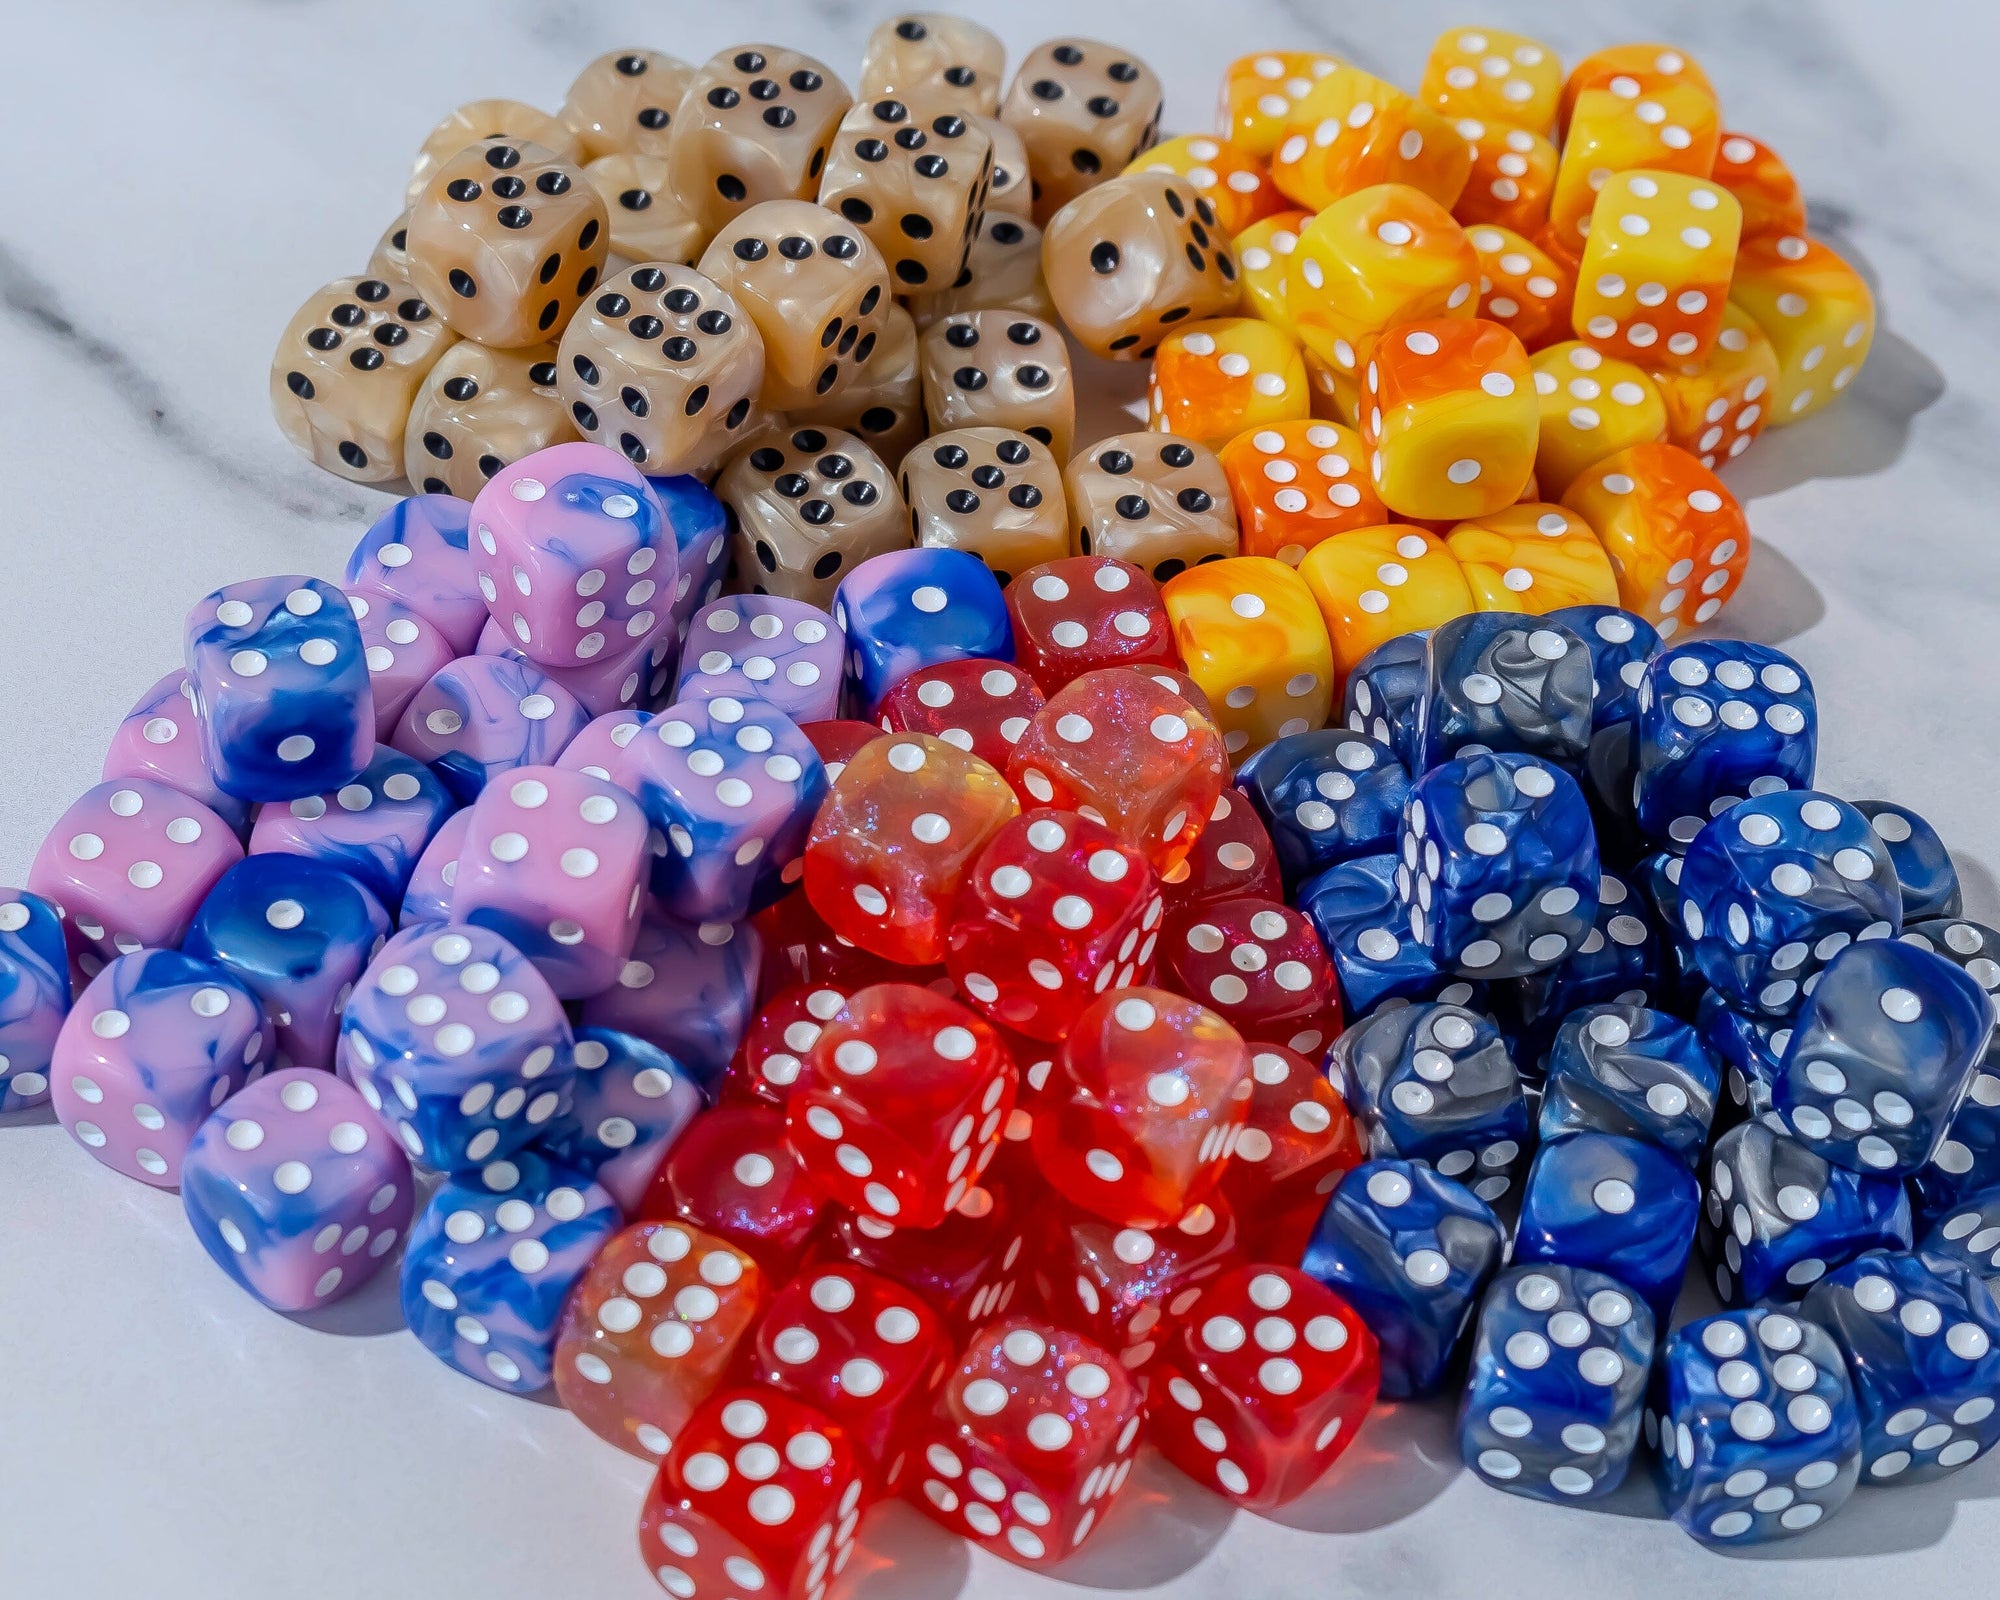 12mm D6 - 25 Count Mystery Set!